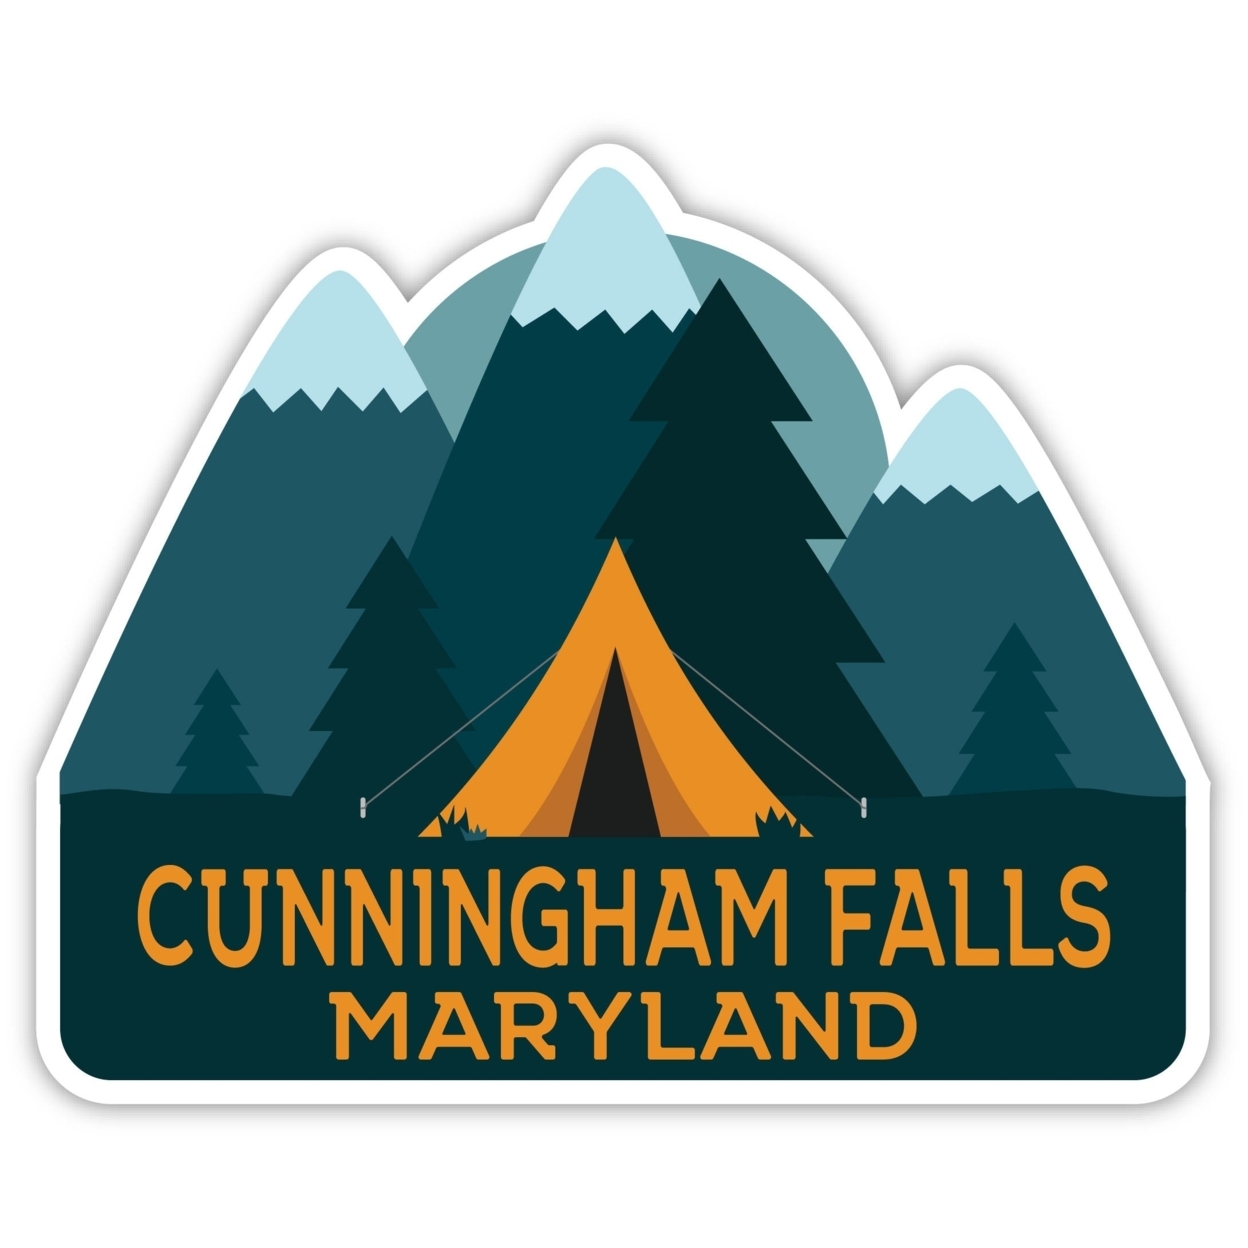 Cunningham Falls Maryland Souvenir Decorative Stickers (Choose Theme And Size) - Single Unit, 10-Inch, Tent